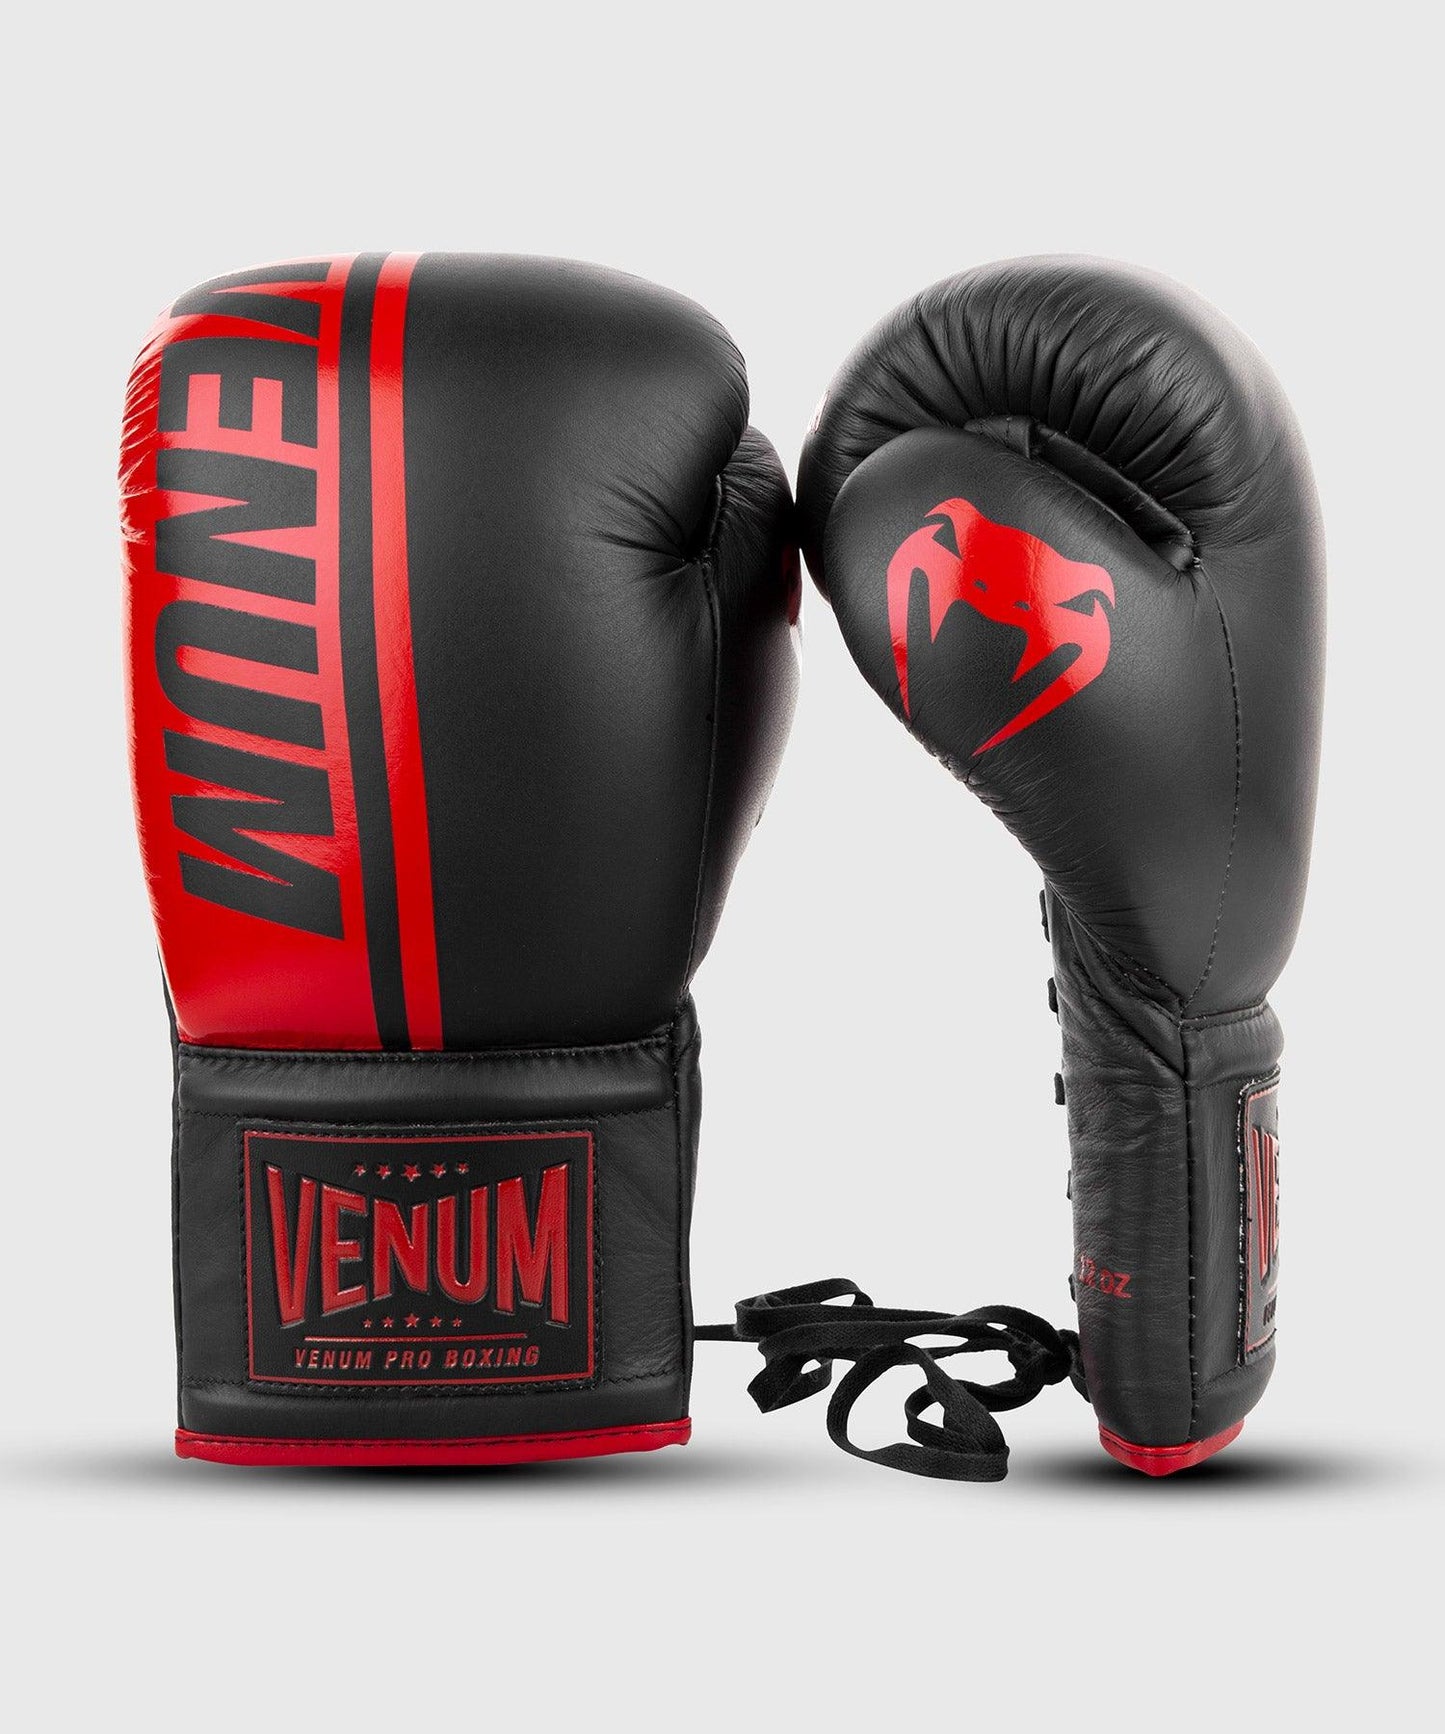 Venum Shield Pro Boxing Gloves - With Laces - Black/Red Picture 2